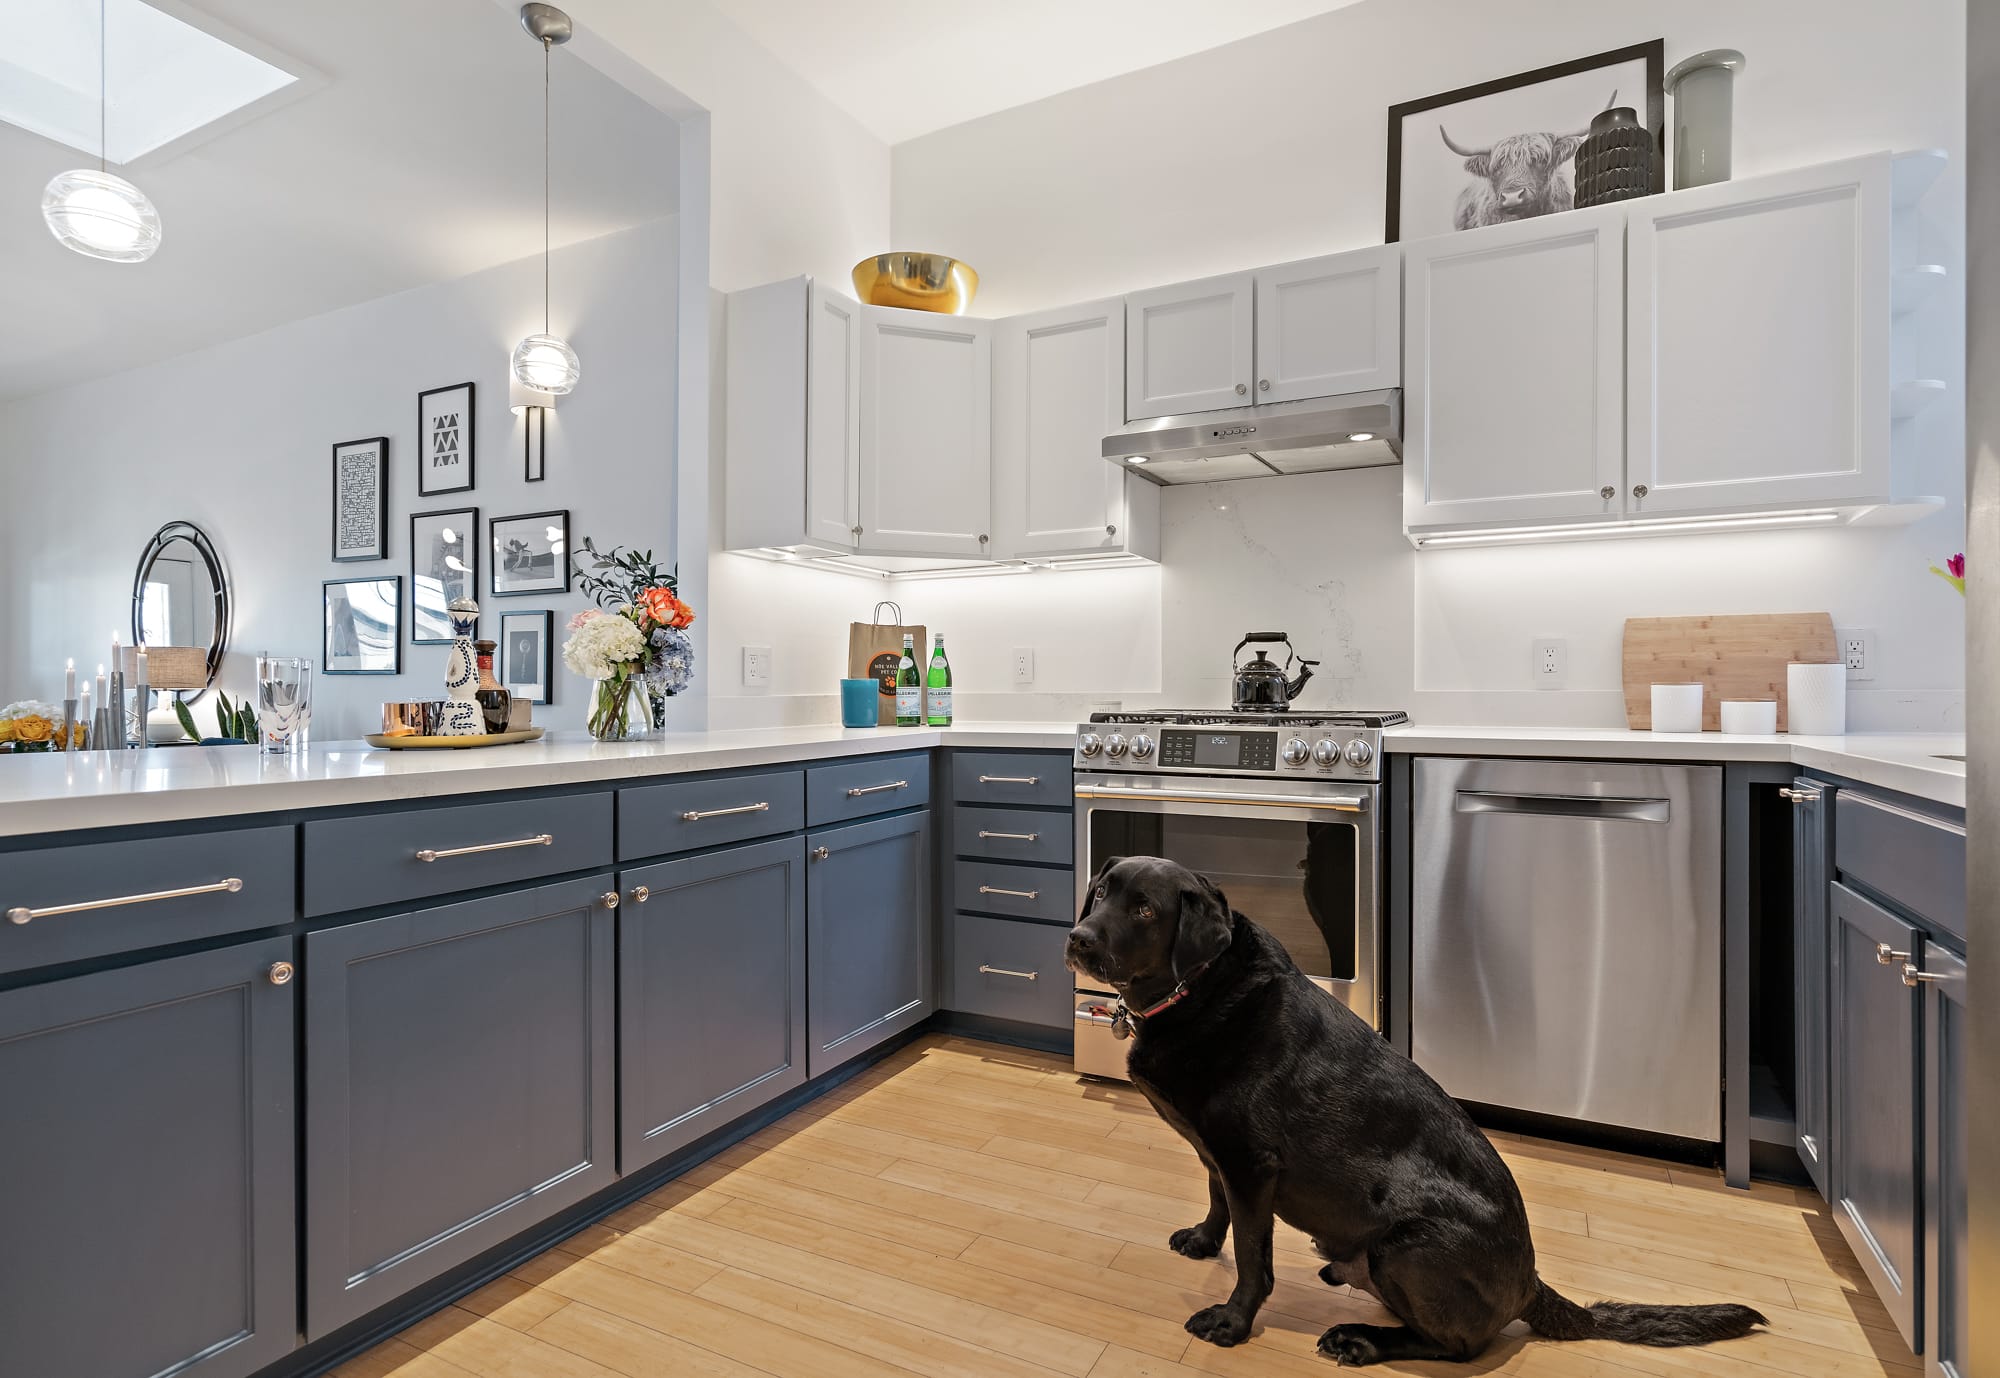 The Kitchen and Dog